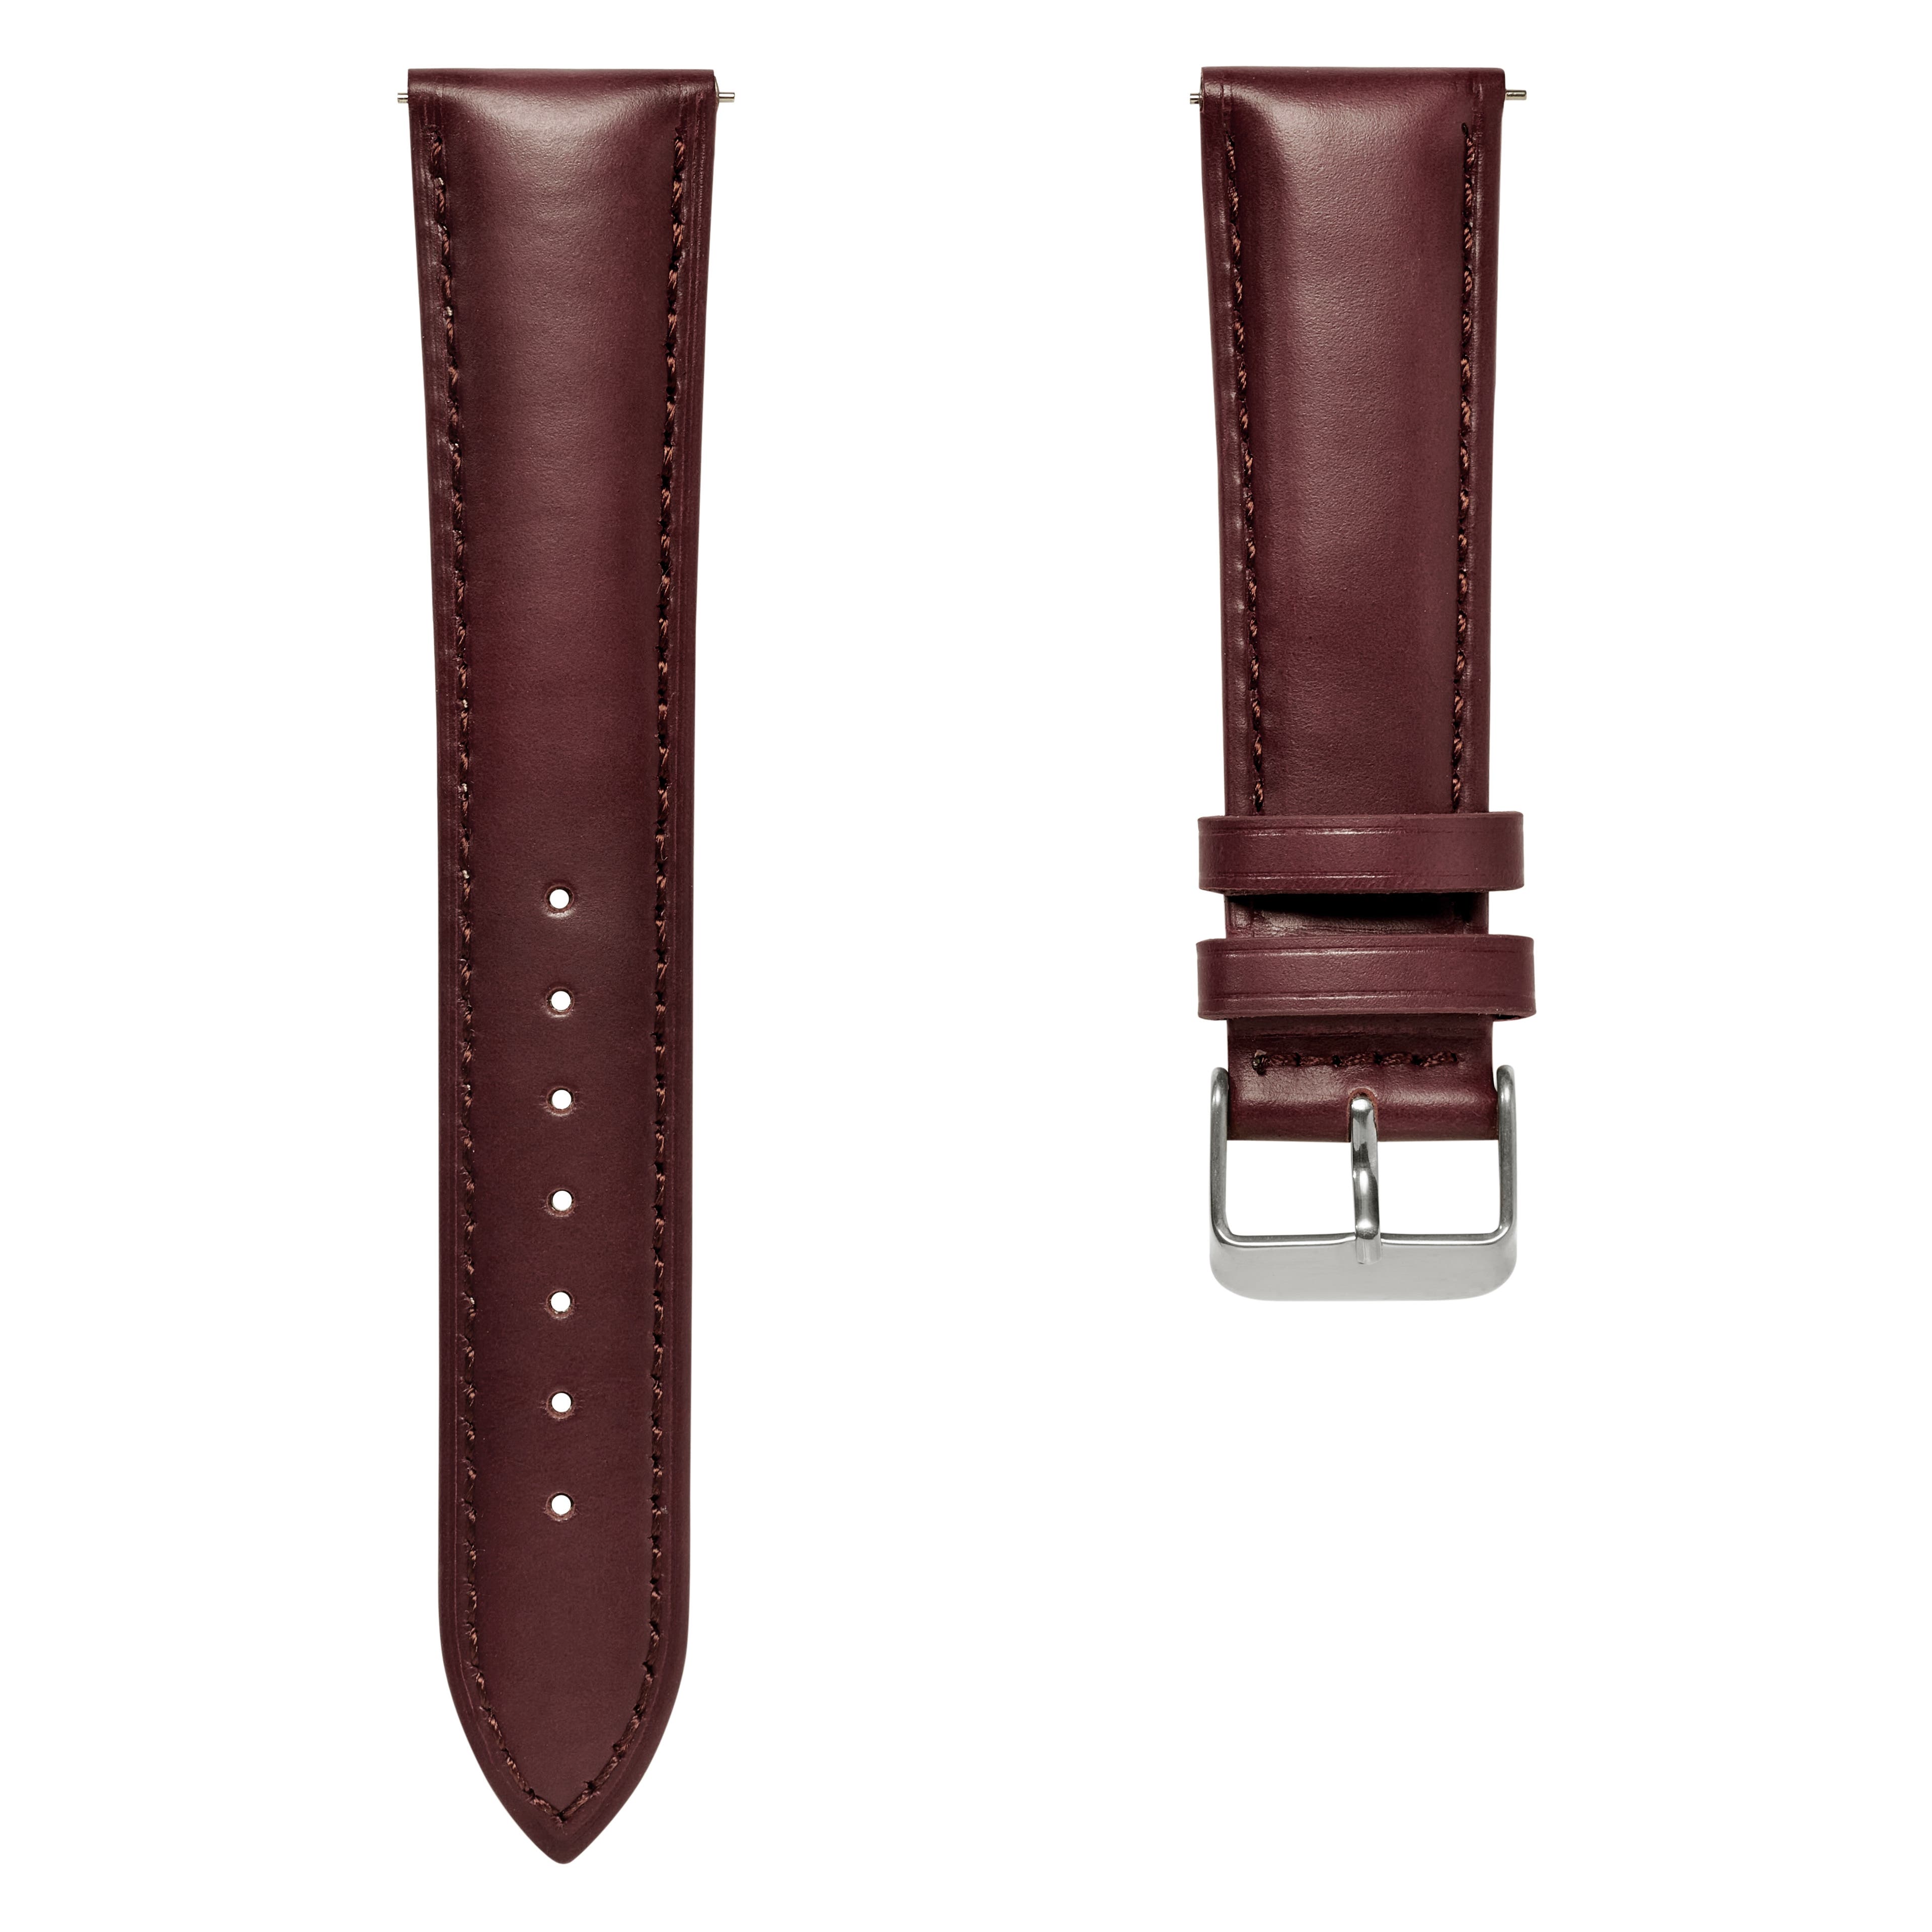 18mm Dark-Brown Leather Watch Strap with Silver-Tone Buckle – Quick Release